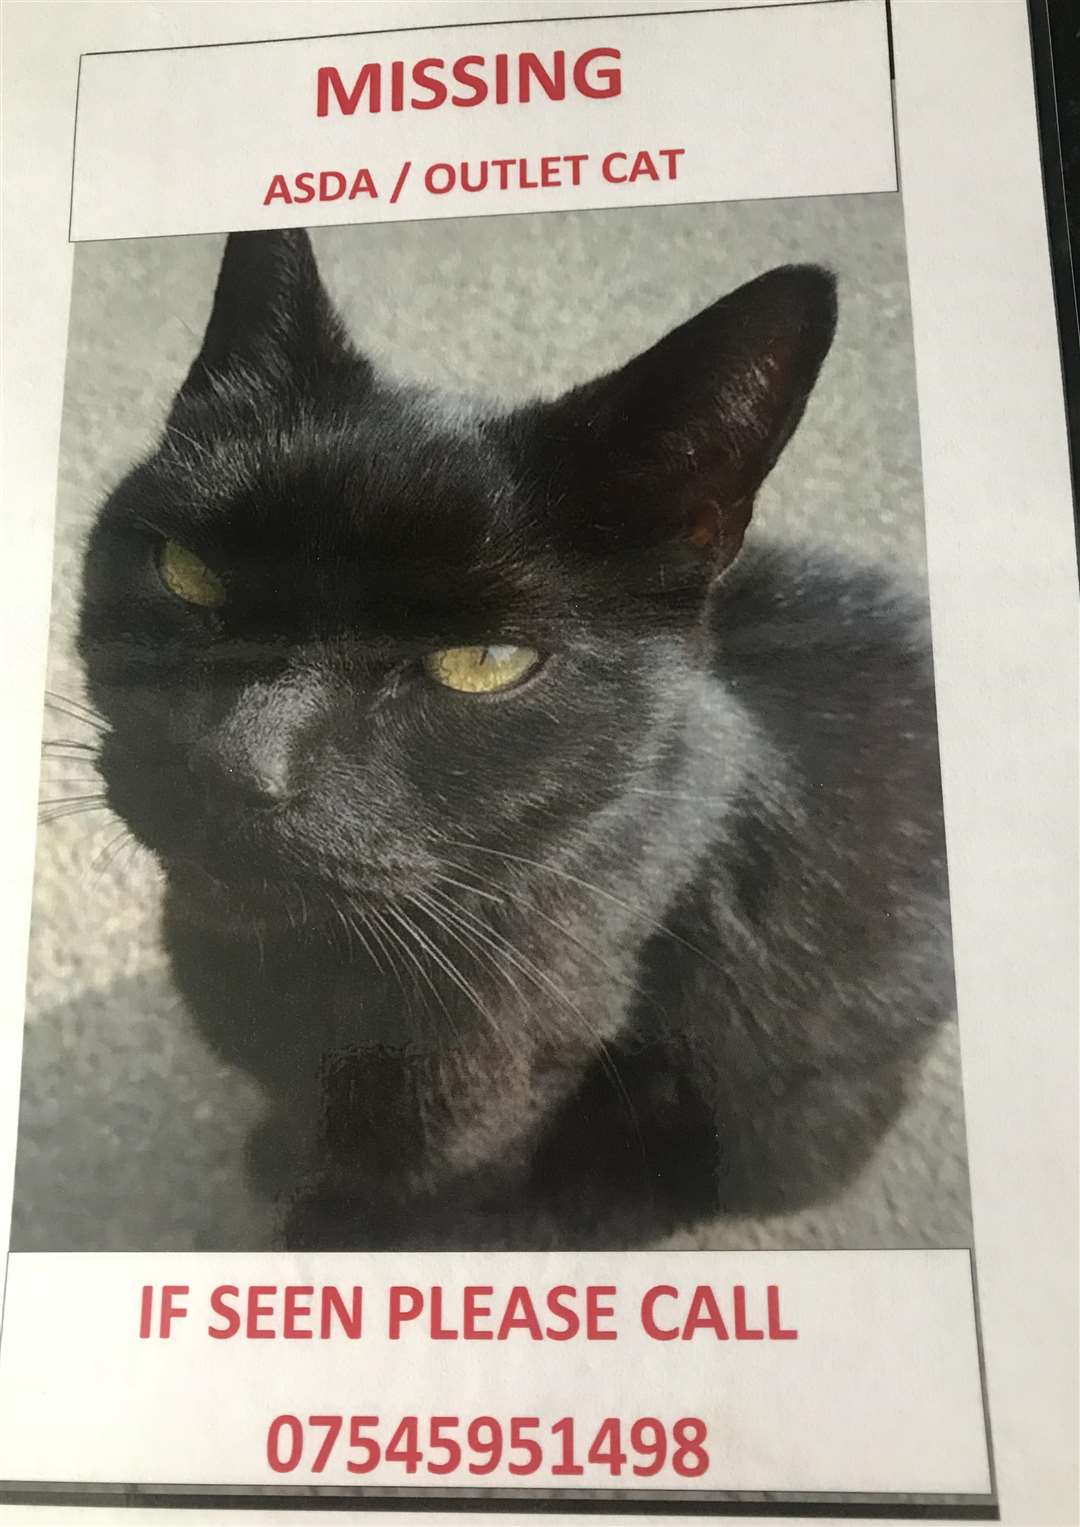 Sammy has been missing for more than a week